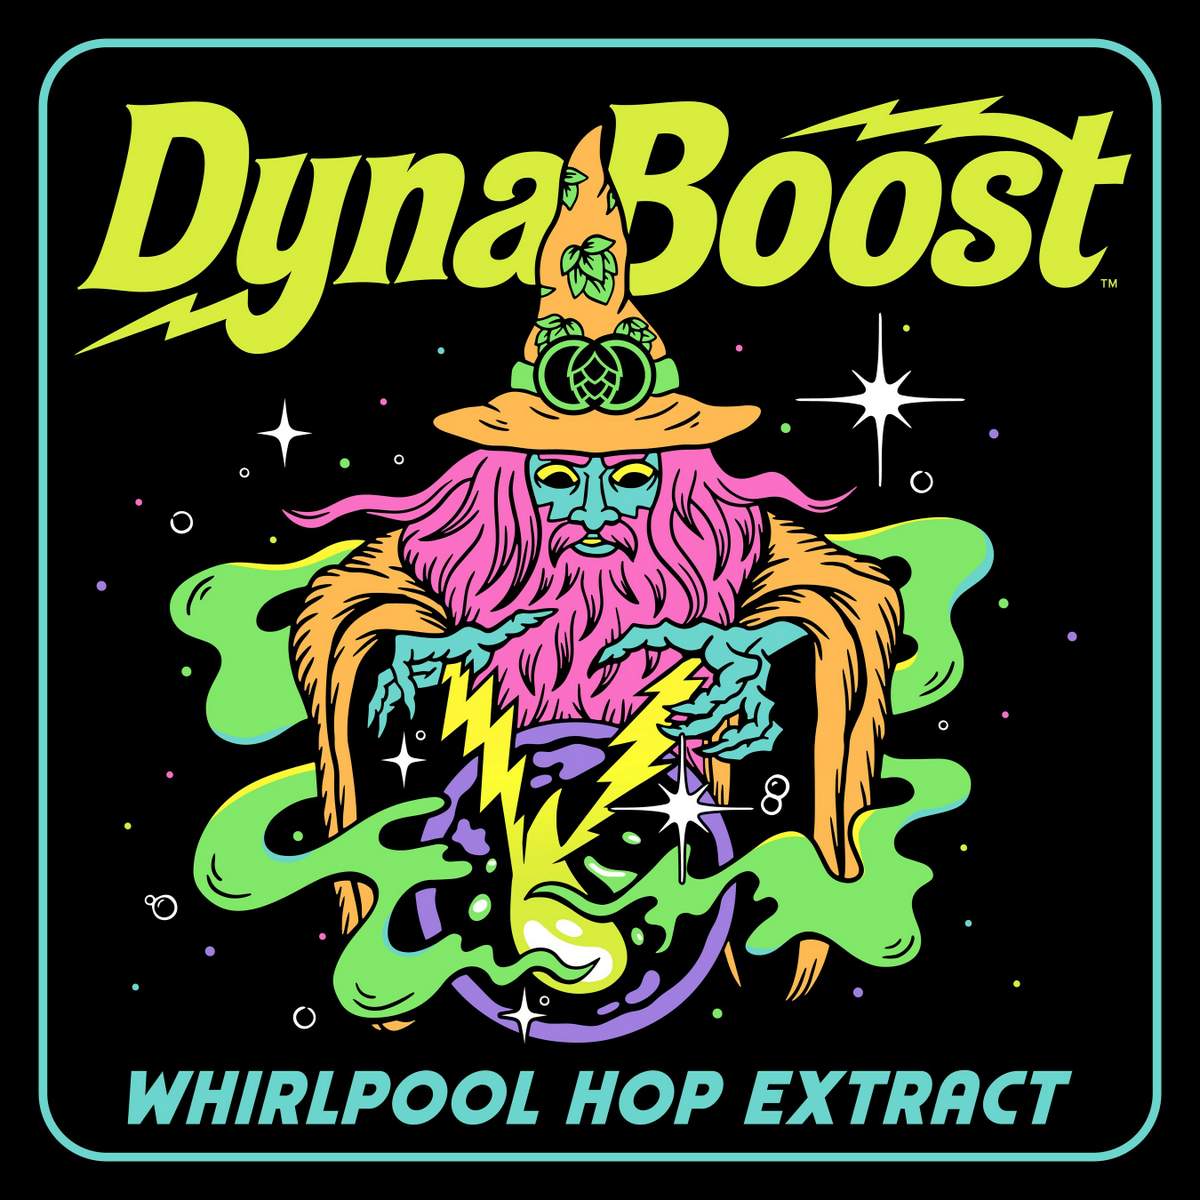 Yakima Chief Hops (YCH), a grower-owned global hop supplier, is proud to present DynaBoost™! Formerly known as YCH 702, DynaBoost™ sets itself apart as an exceptionally flowable variety-specific hop extract. Designed for whirlpool use, DynaBoost™ was created using a proprietary process, capturing true-to-type hop aroma attributes and delivering them to your beer in an easy-to-pour bottle.